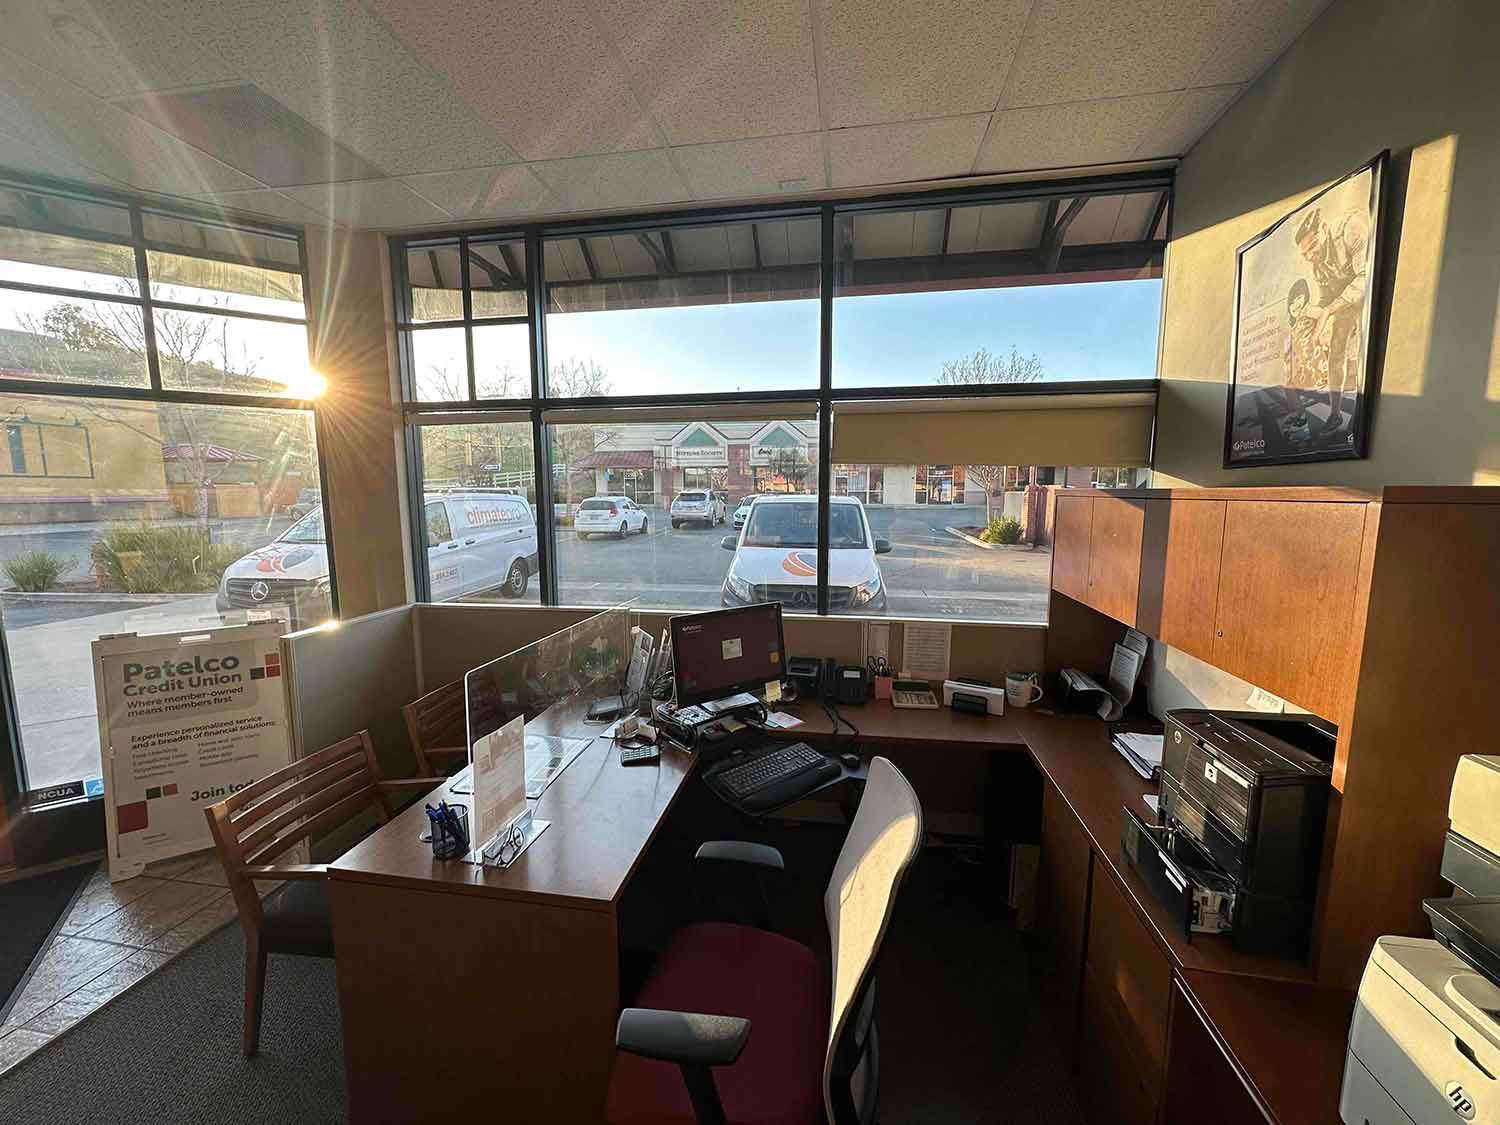 A Livermore, CA, credit union is transformed with 3M Night Vision window film, by ClimatePro.  Get a free estimate for your business in Northern California today.